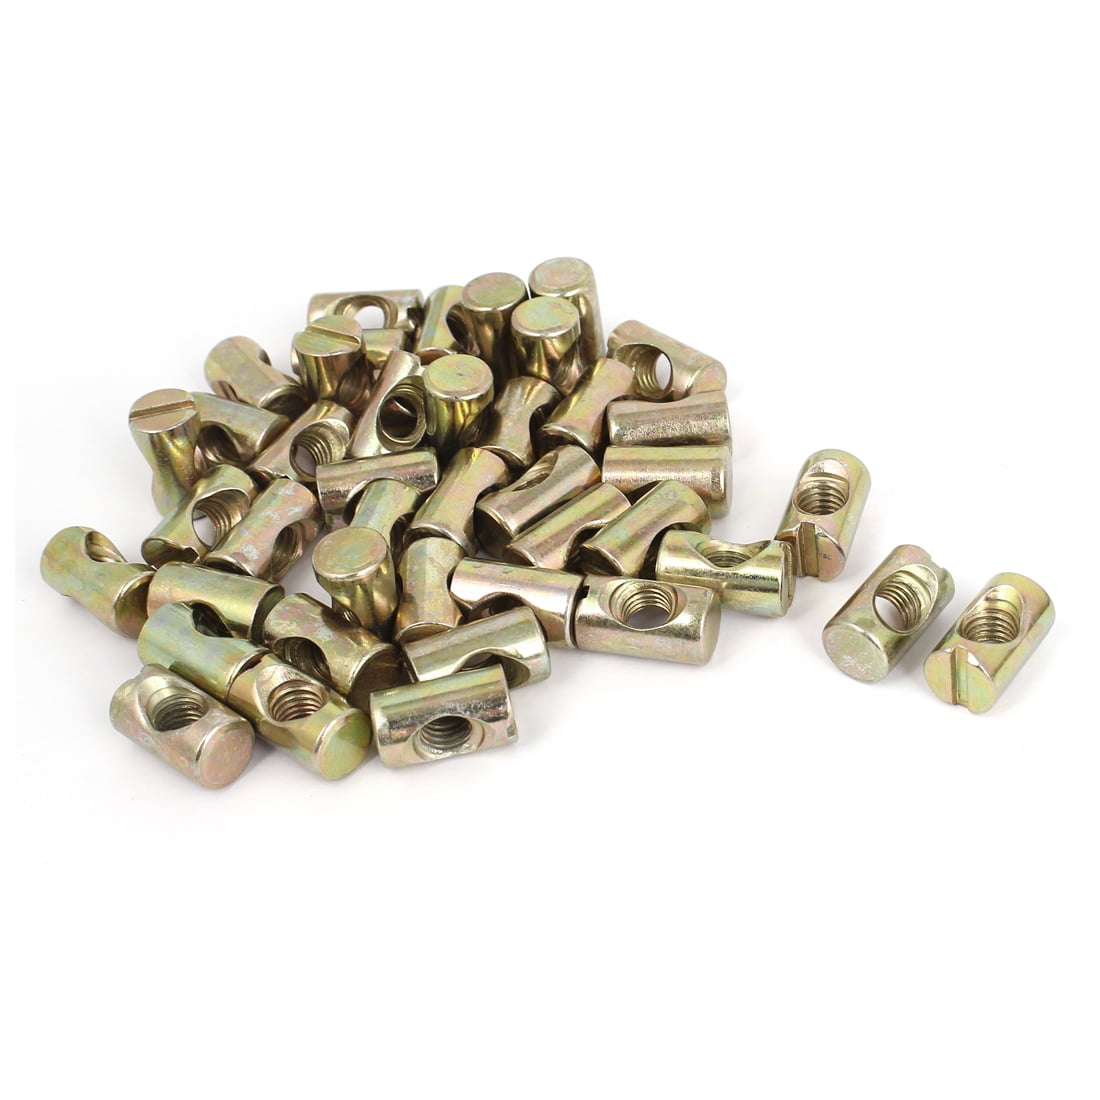 100x Zinc Plated Connection Bolts Barrel Nuts for Furniture Cot Bed Assembly